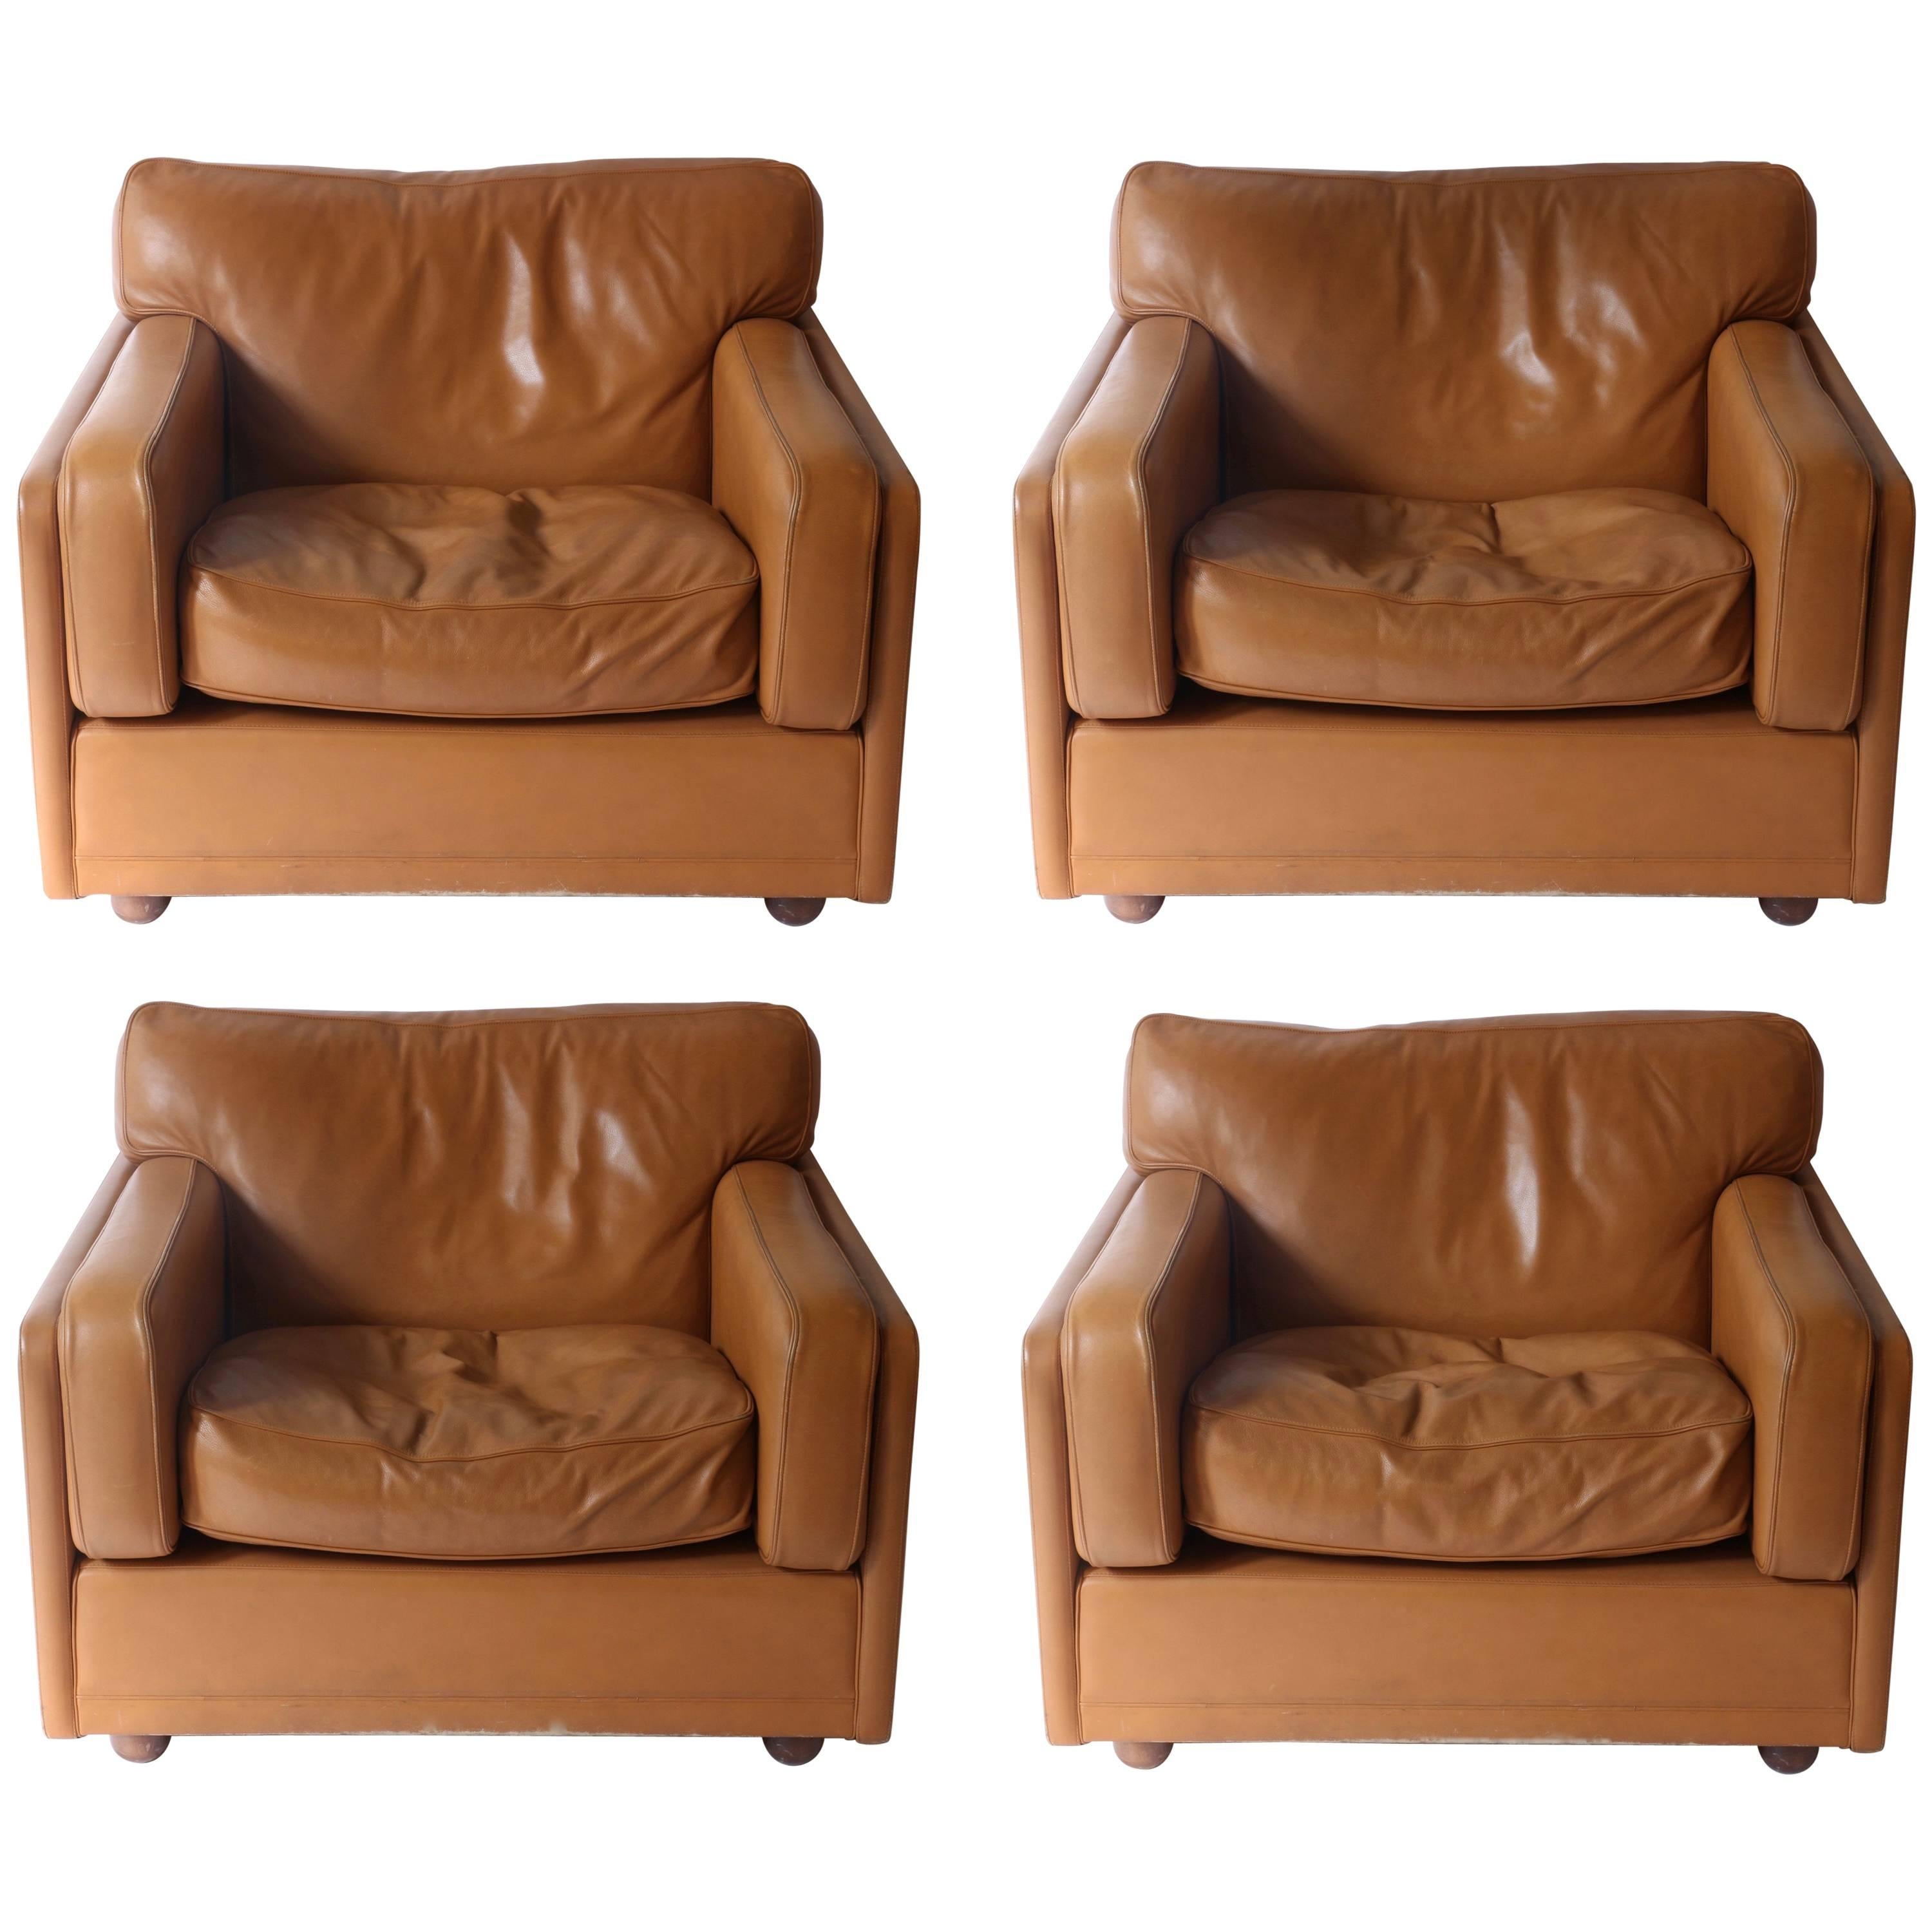 Set of three club chairs in brown honey color, made by Poltrona Frau, 1978